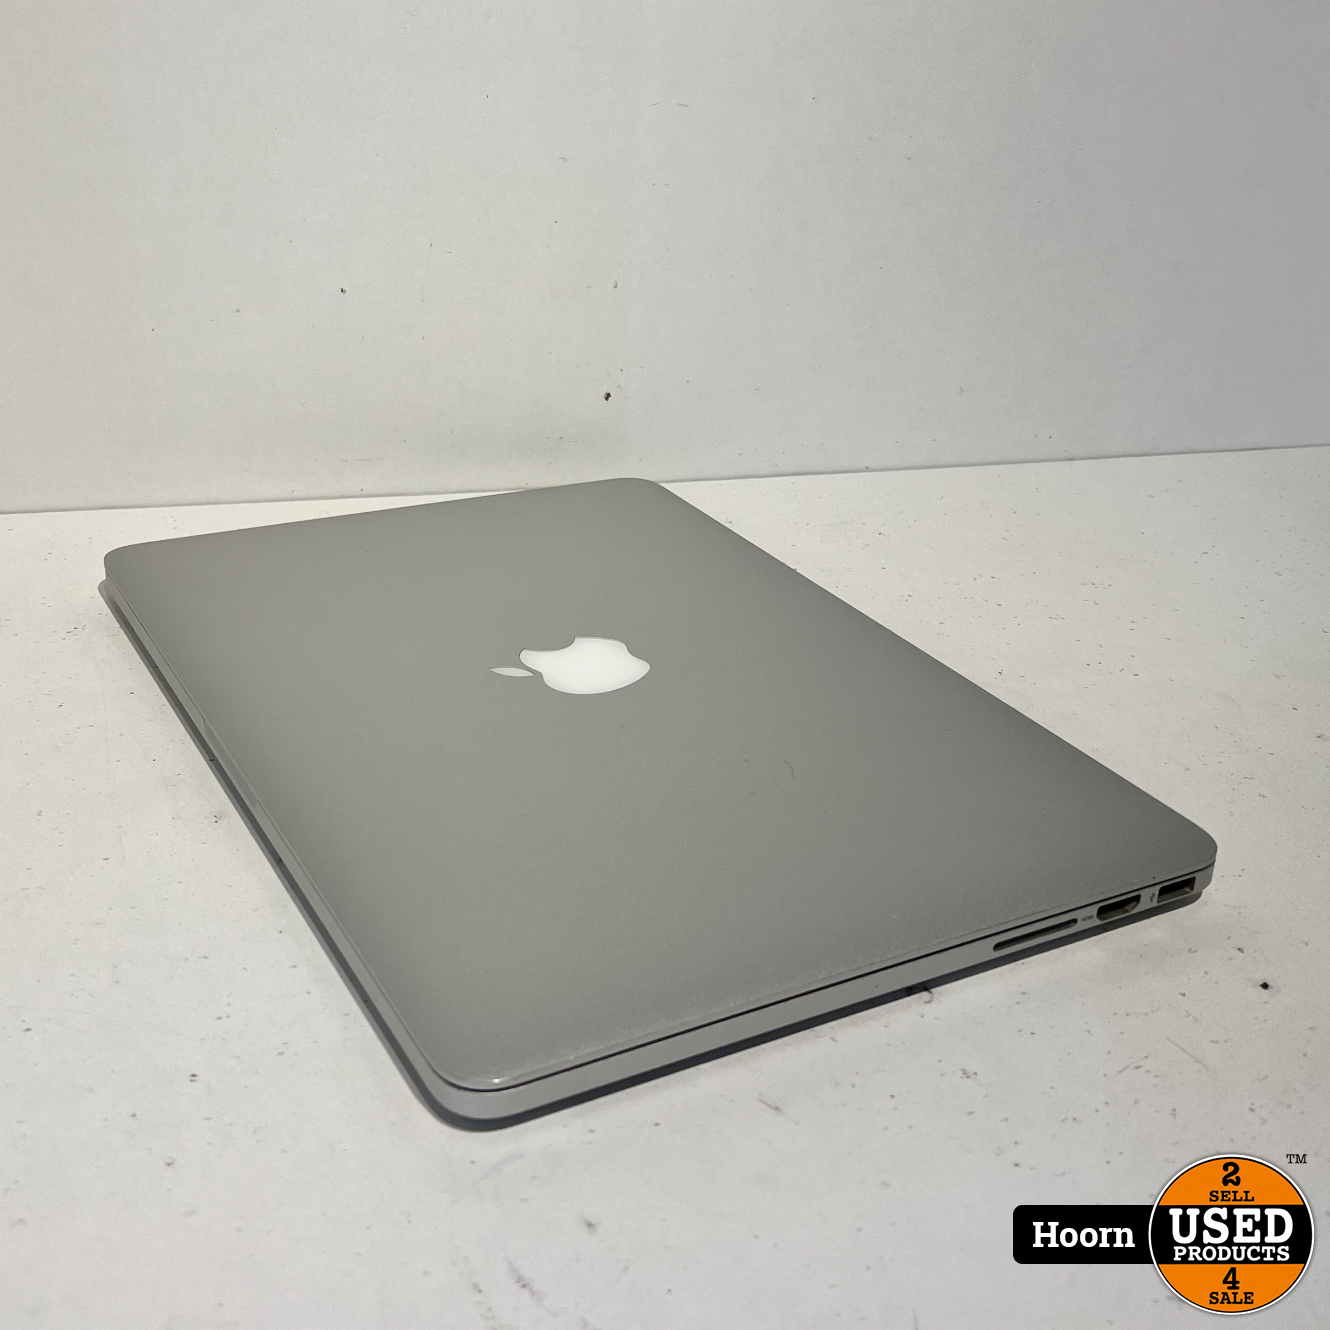 Apple Macbook Pro Retina 2014 incl. Lader i5/8GB/128GB - Used Products